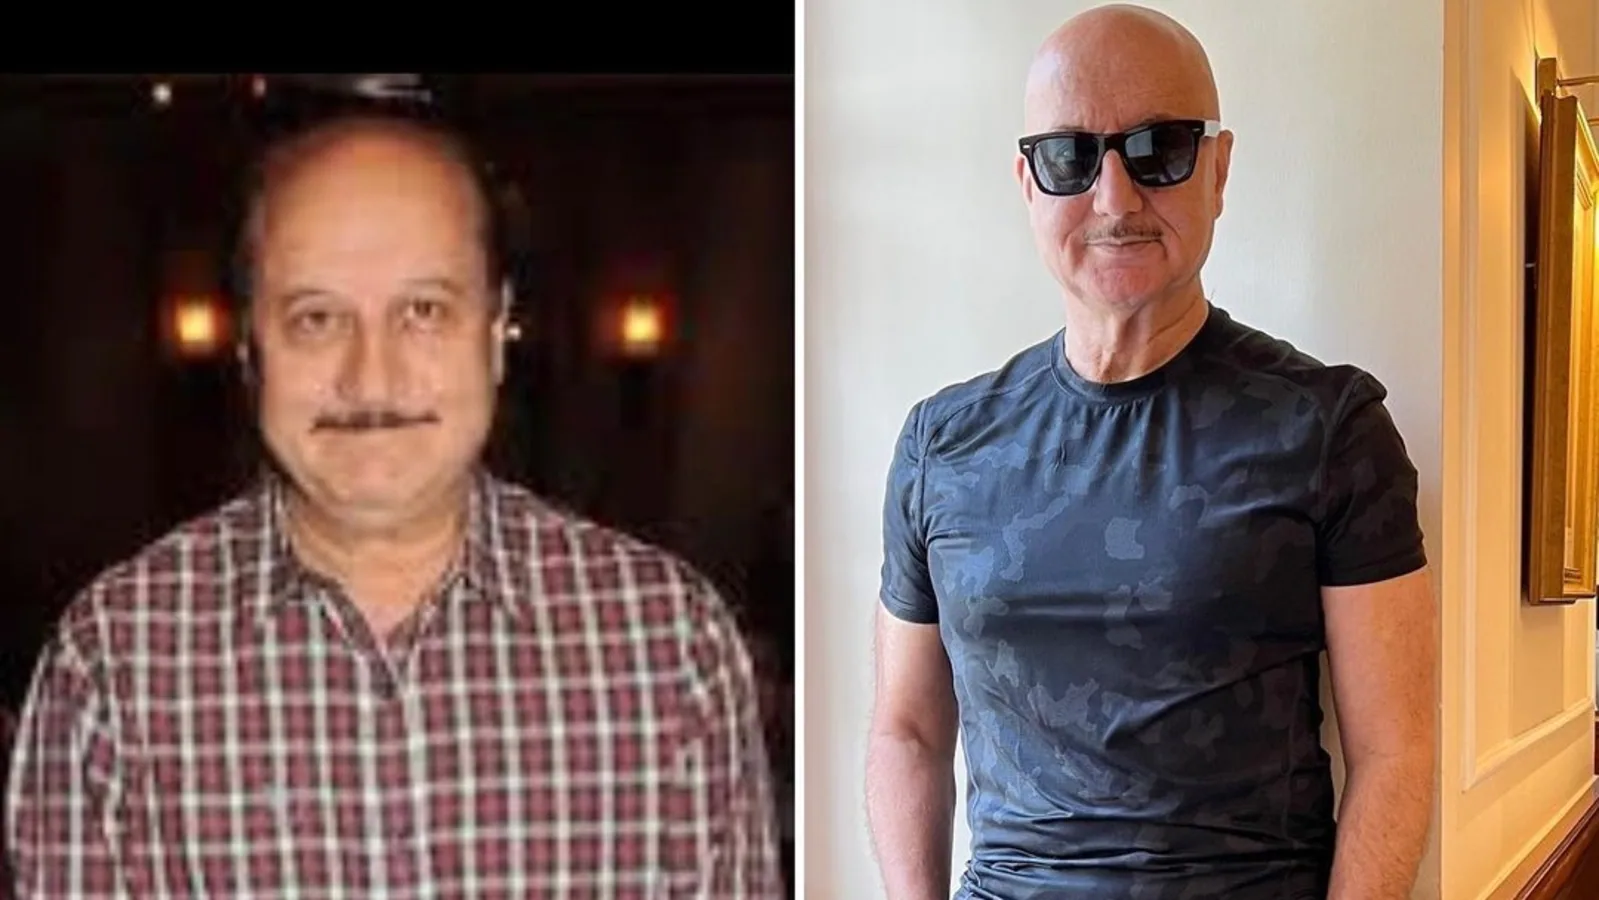 Anupam Kher shares photos highlighting his physical transformation, fans say ‘give it for a before and after ad’